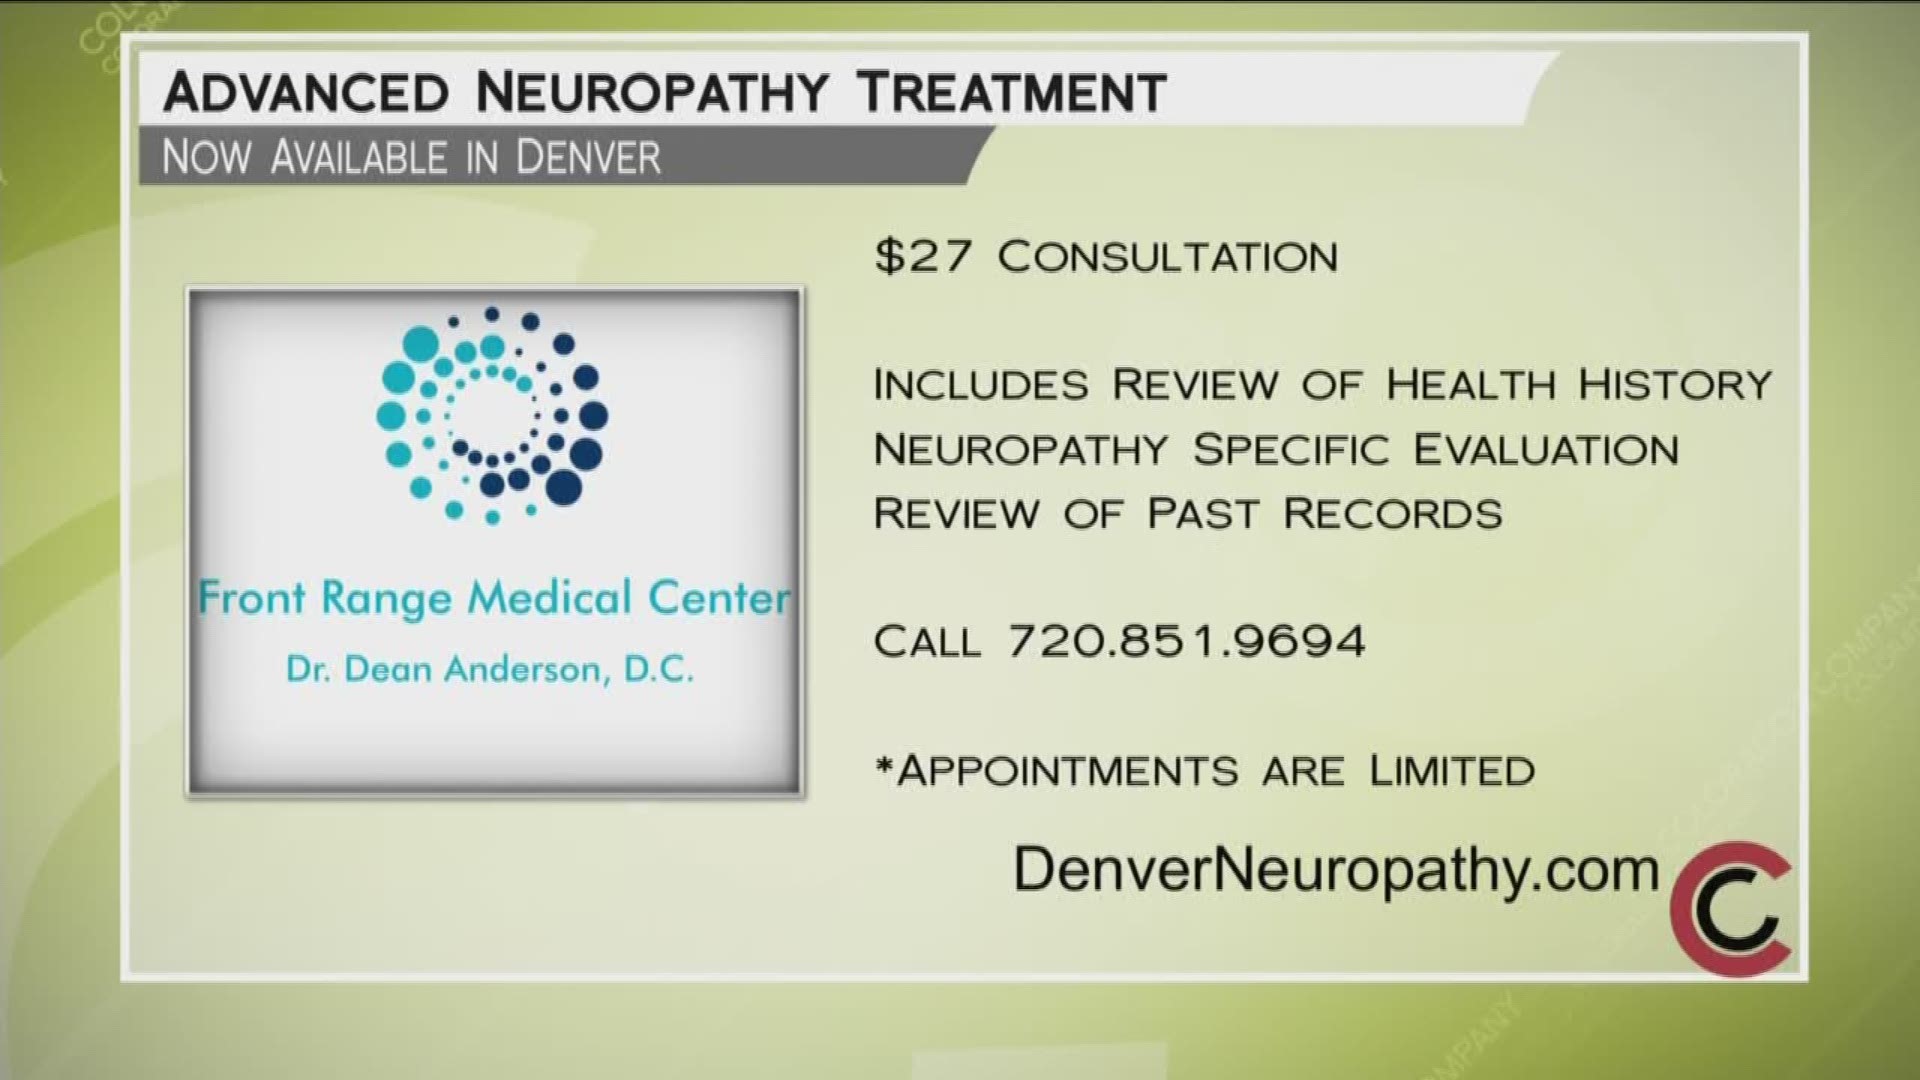 Schedule your consultation with Dr. Dean Anderson today. Appointments are limited, so call 720.851.9694. The consultation includes looking at your personal health history, a confidential questionnaire, and a patient-specific neuropathy exam—all to determine if you’re a good fit for Dr. Anderson’s treatment. The consultation is only $27, normally $245! Learn more online at www.DenverNeuropathy.com. 
THIS INTERVIEW HAS COMMERCIAL CONTENT. PRODUCTS AND SERVICES FEATURED APPEAR AS PAID ADVERTISING.